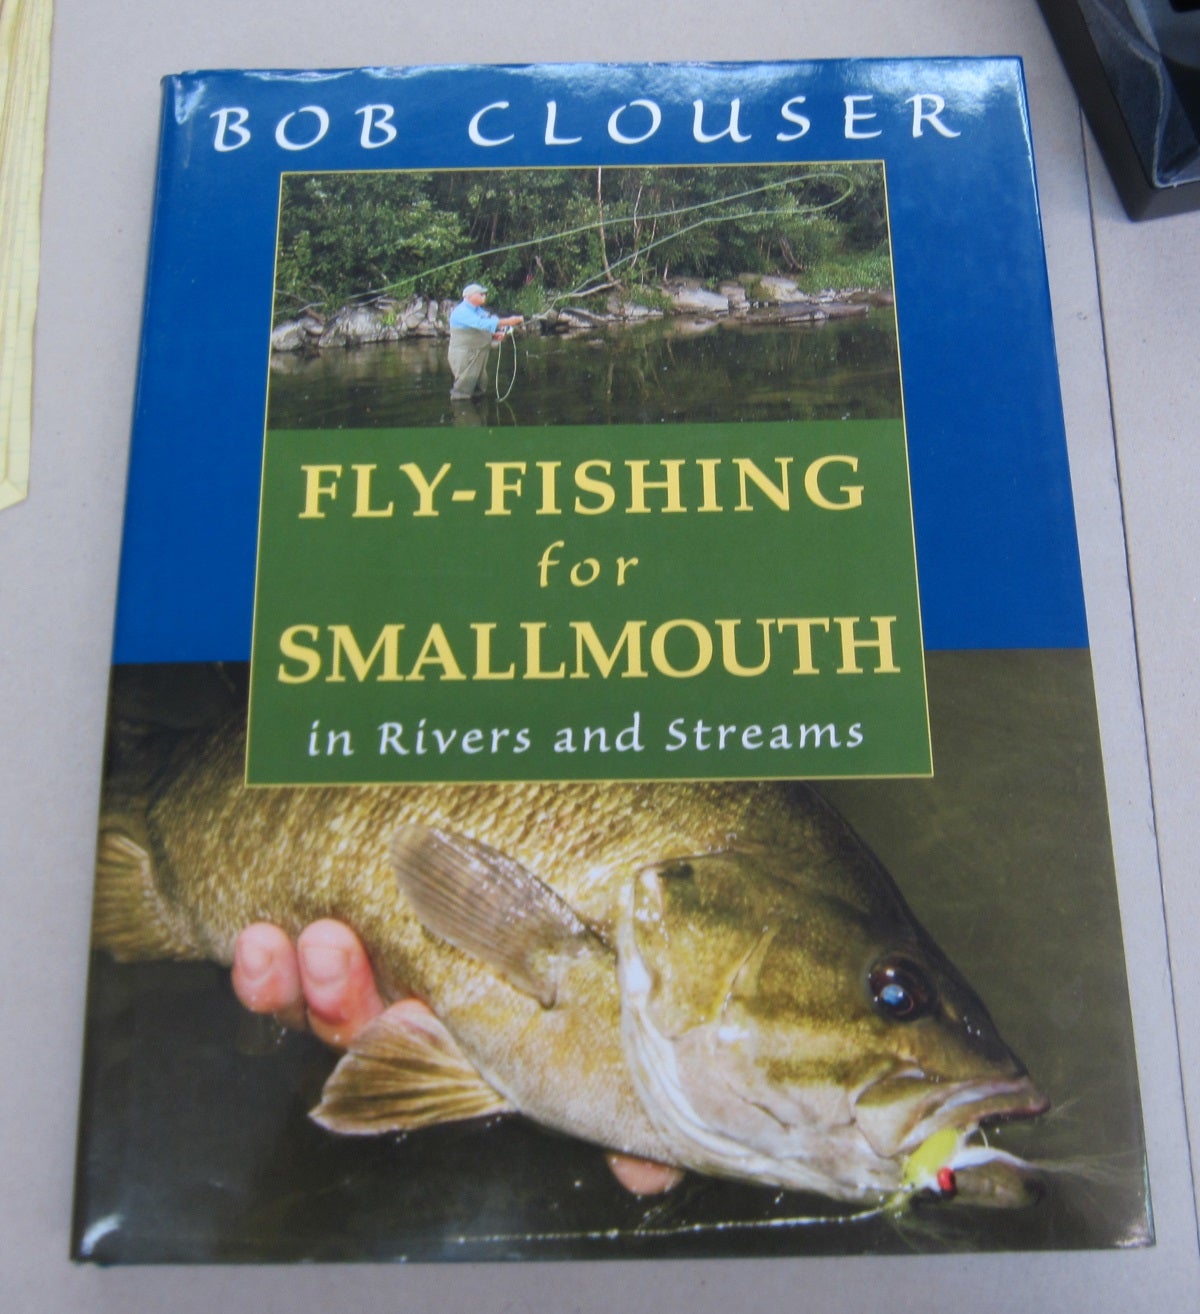 Fly-Fishing for Smallmouth in Rivers and Streams, Bob Clouser, Jay Nichols